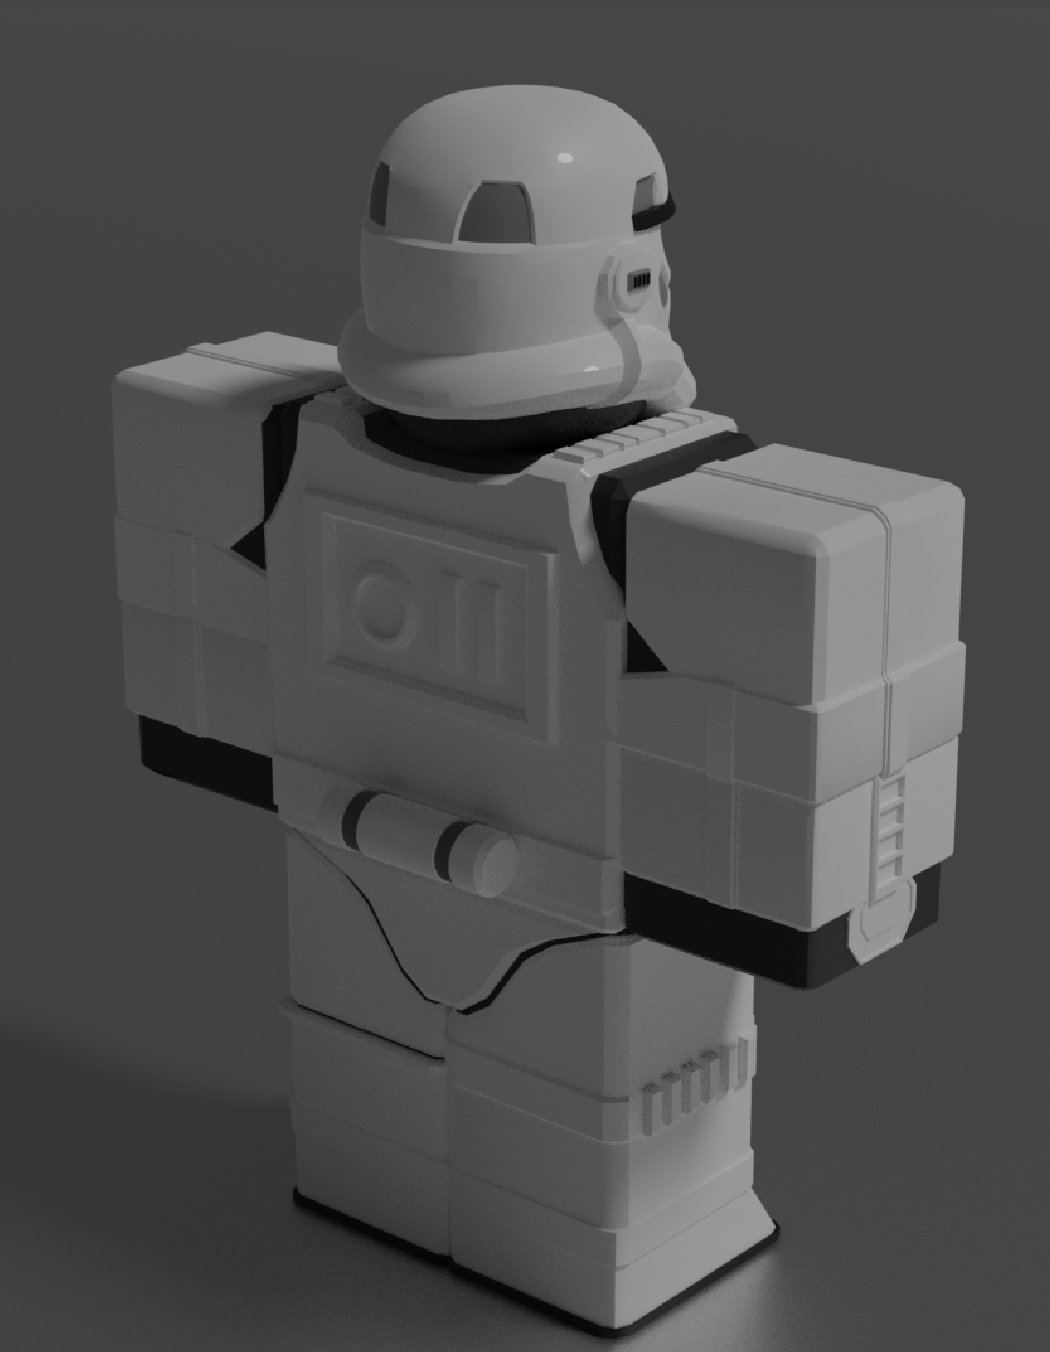 Levipants On Twitter Stormtrooper Vader S Fist Roblox Morph For The Galactic Empire In Askavix S Tjo Roblox Robloxdev - the galactic empire roblox discord